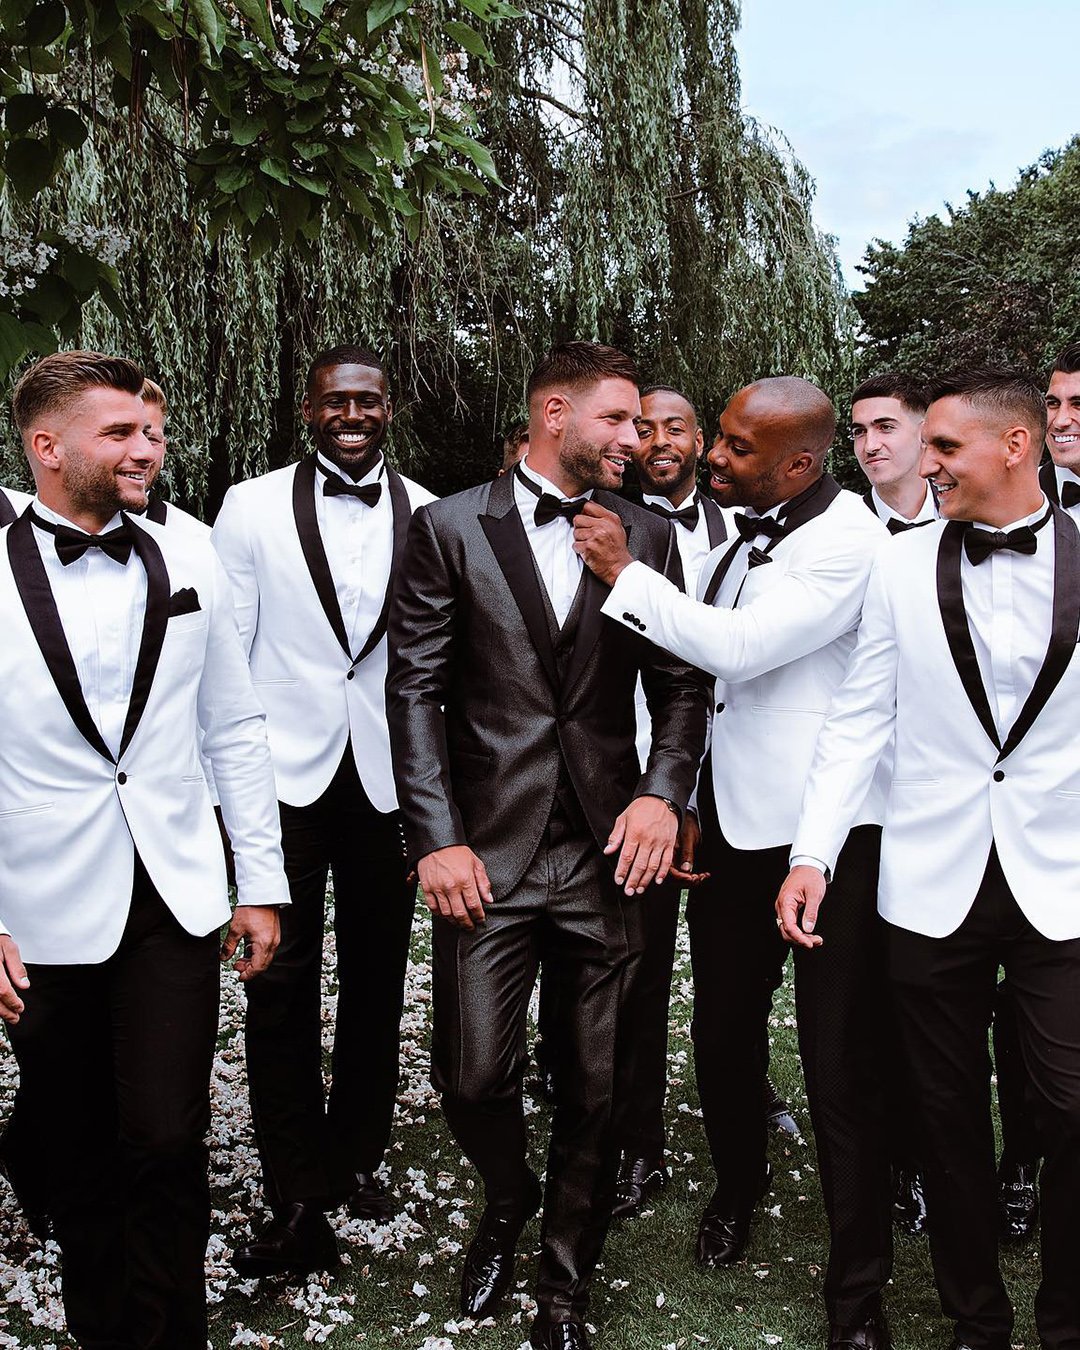 groom suits black white jacket with bow tie chelseawhitephotog